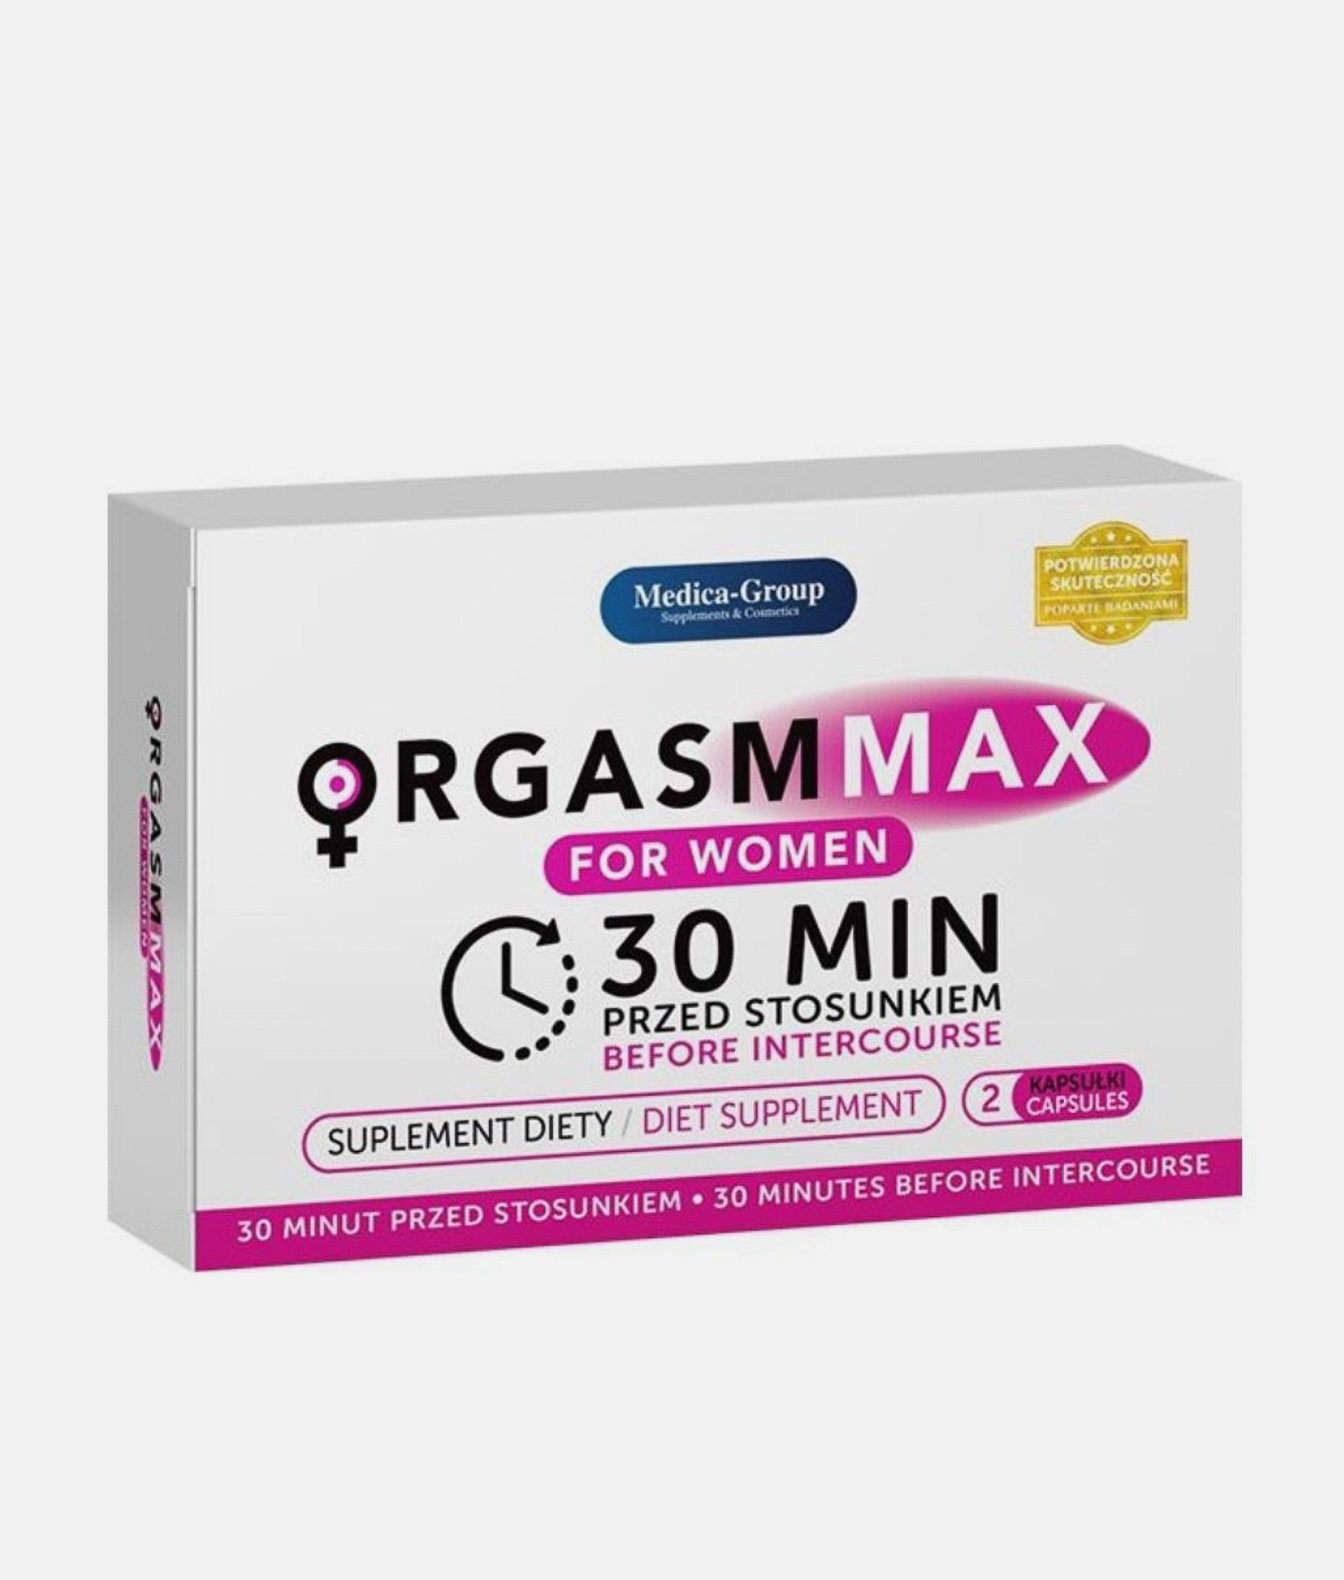 Medica-Group OrgasmMax for Women suplement diety